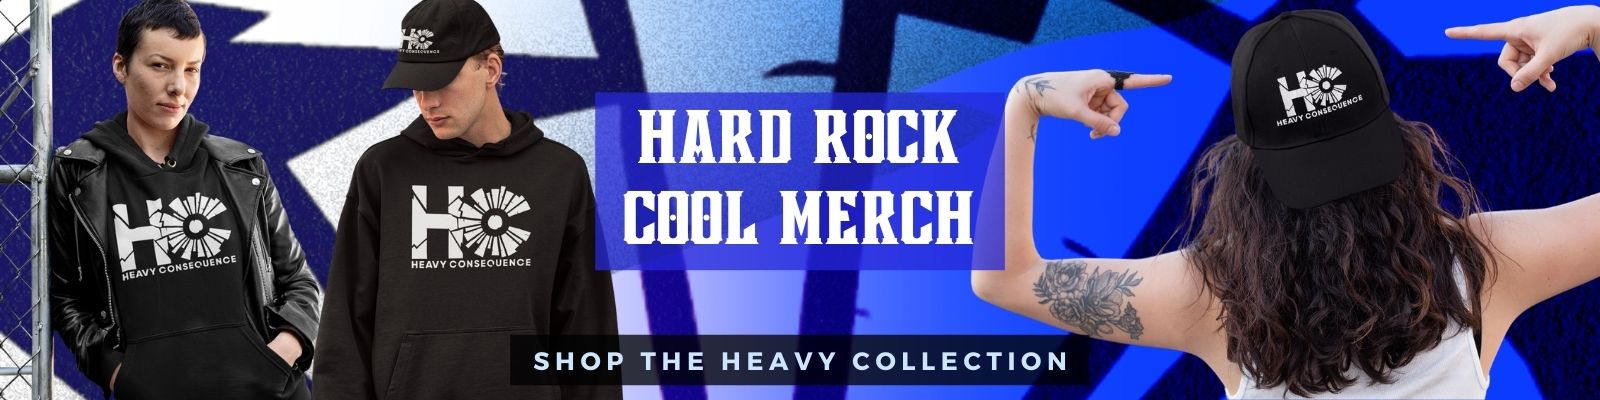 Heavy Rock Consequence Merch